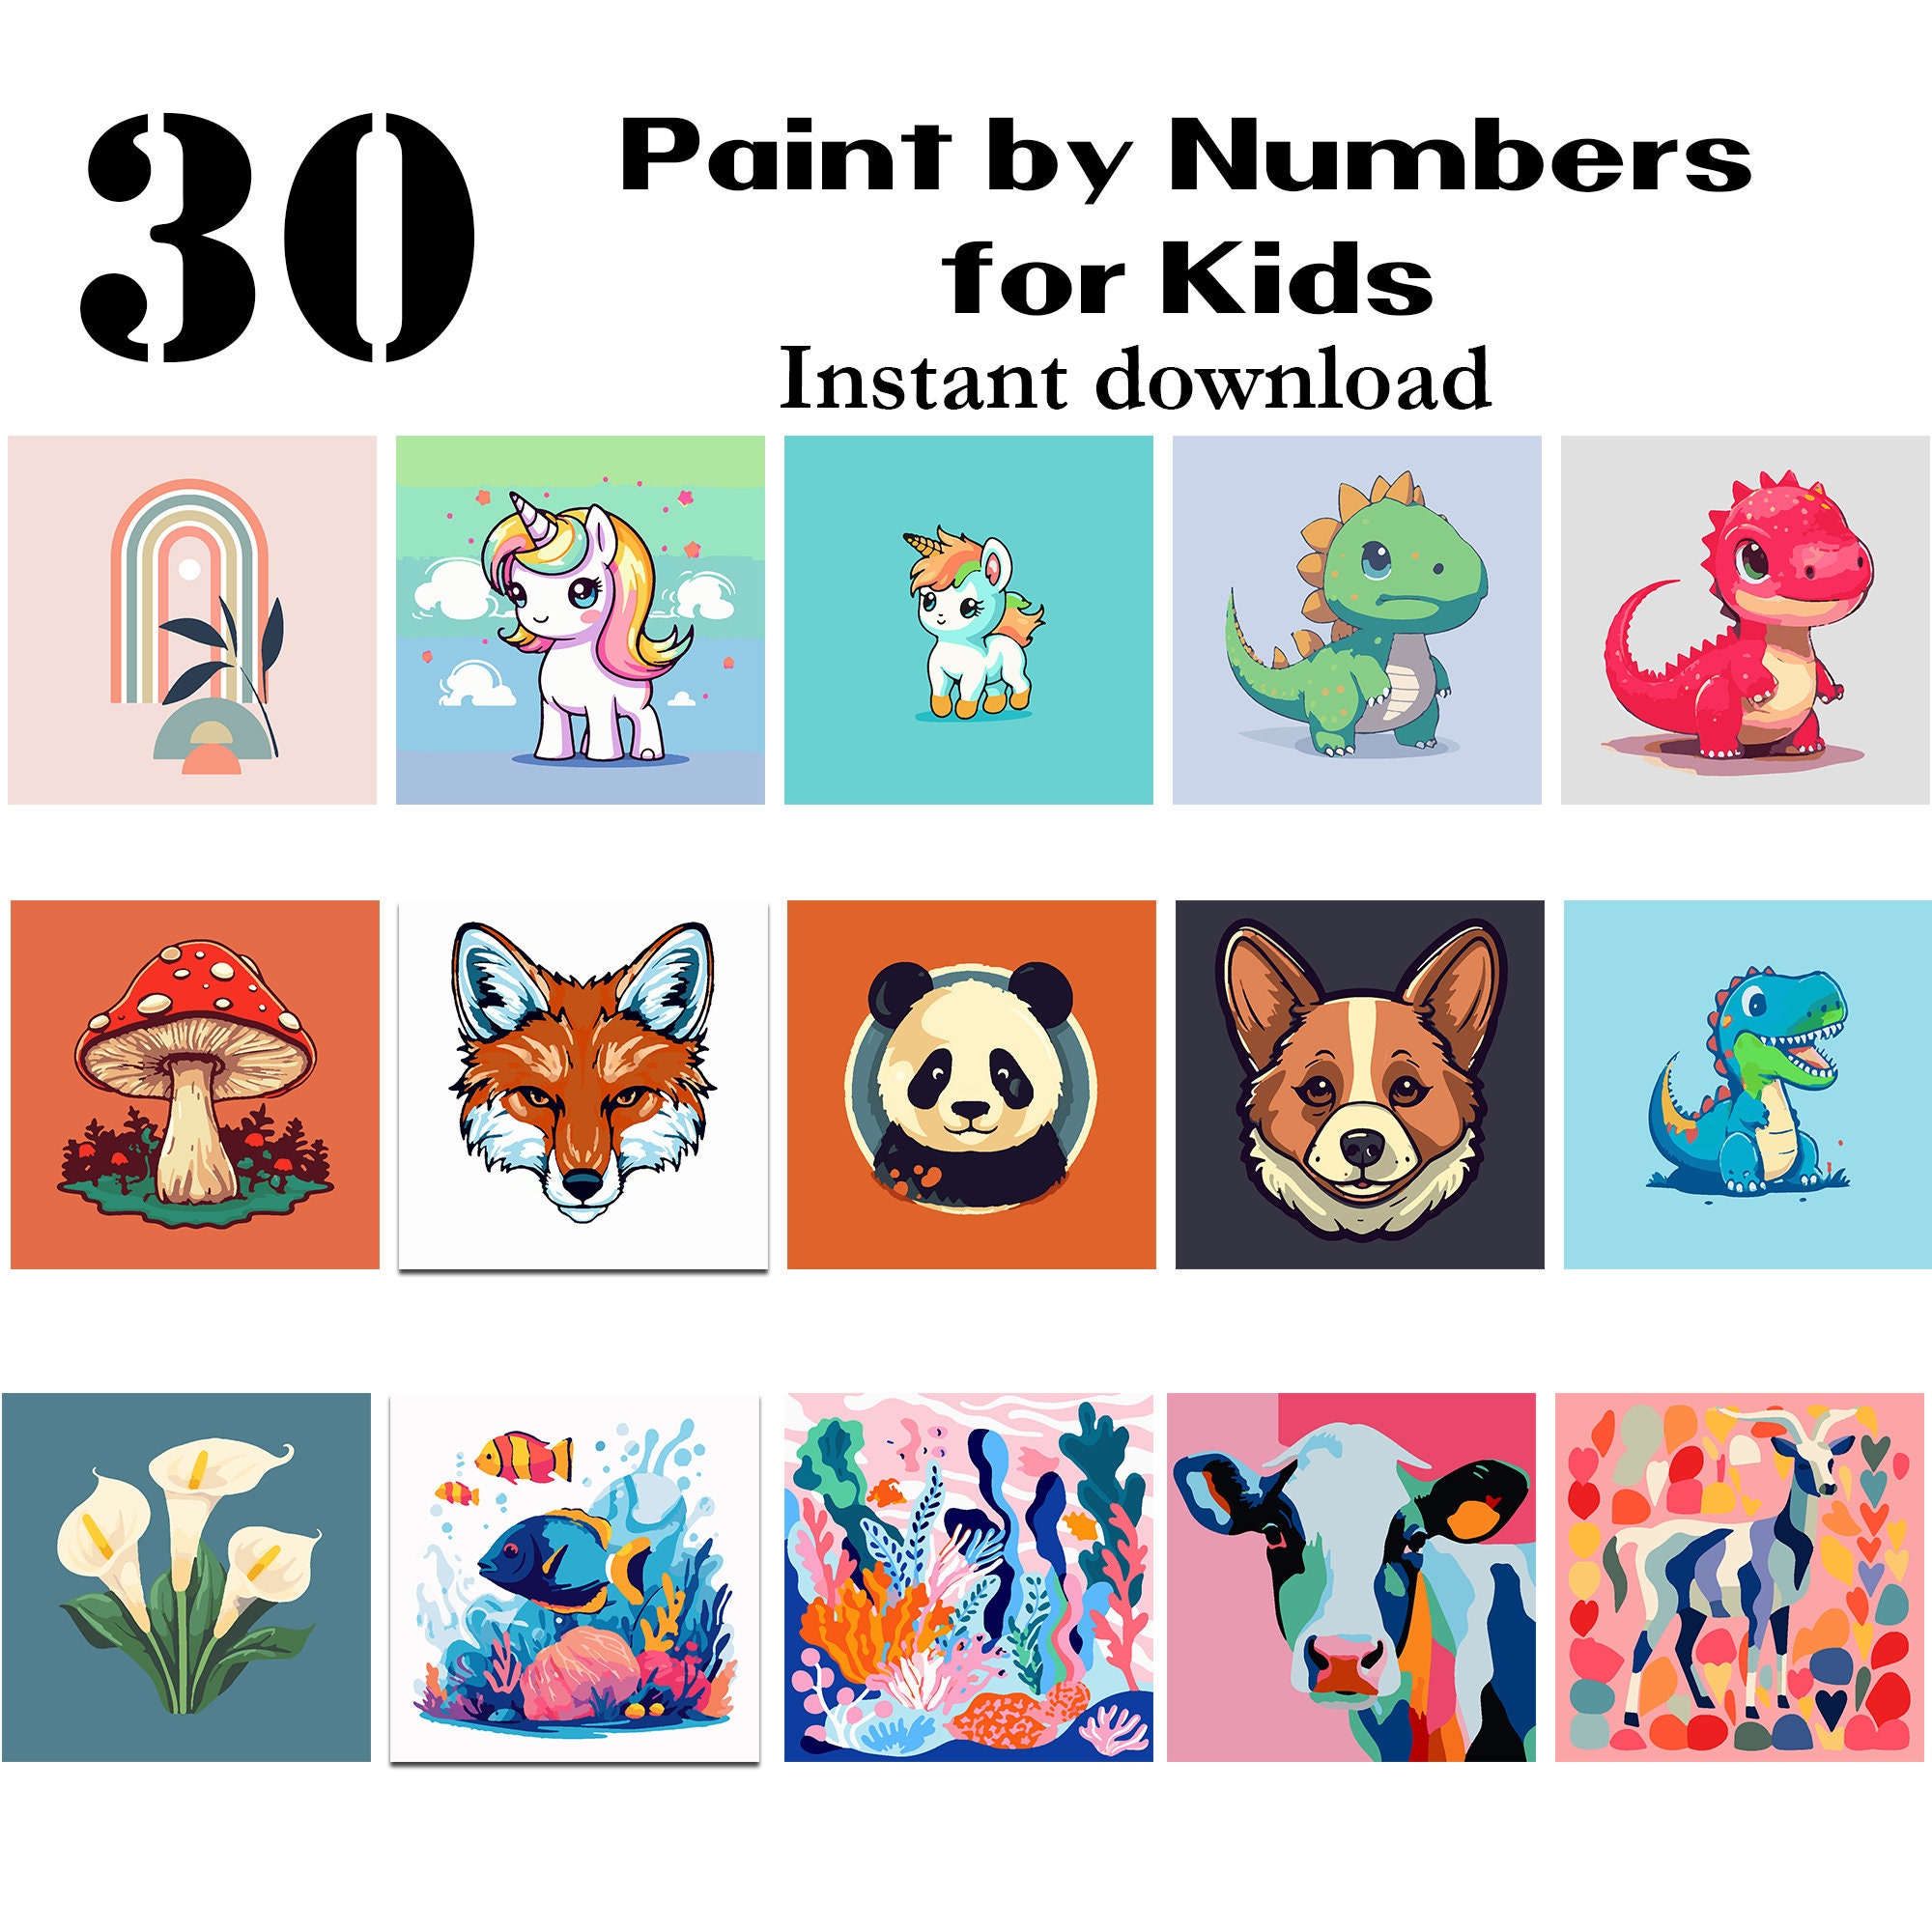 Sunny Seat Dinosaur 5D Diamond Painting Kits with White Frame DIY Diamond  Art for Kids Full Drill Painting by Number Kits for Children